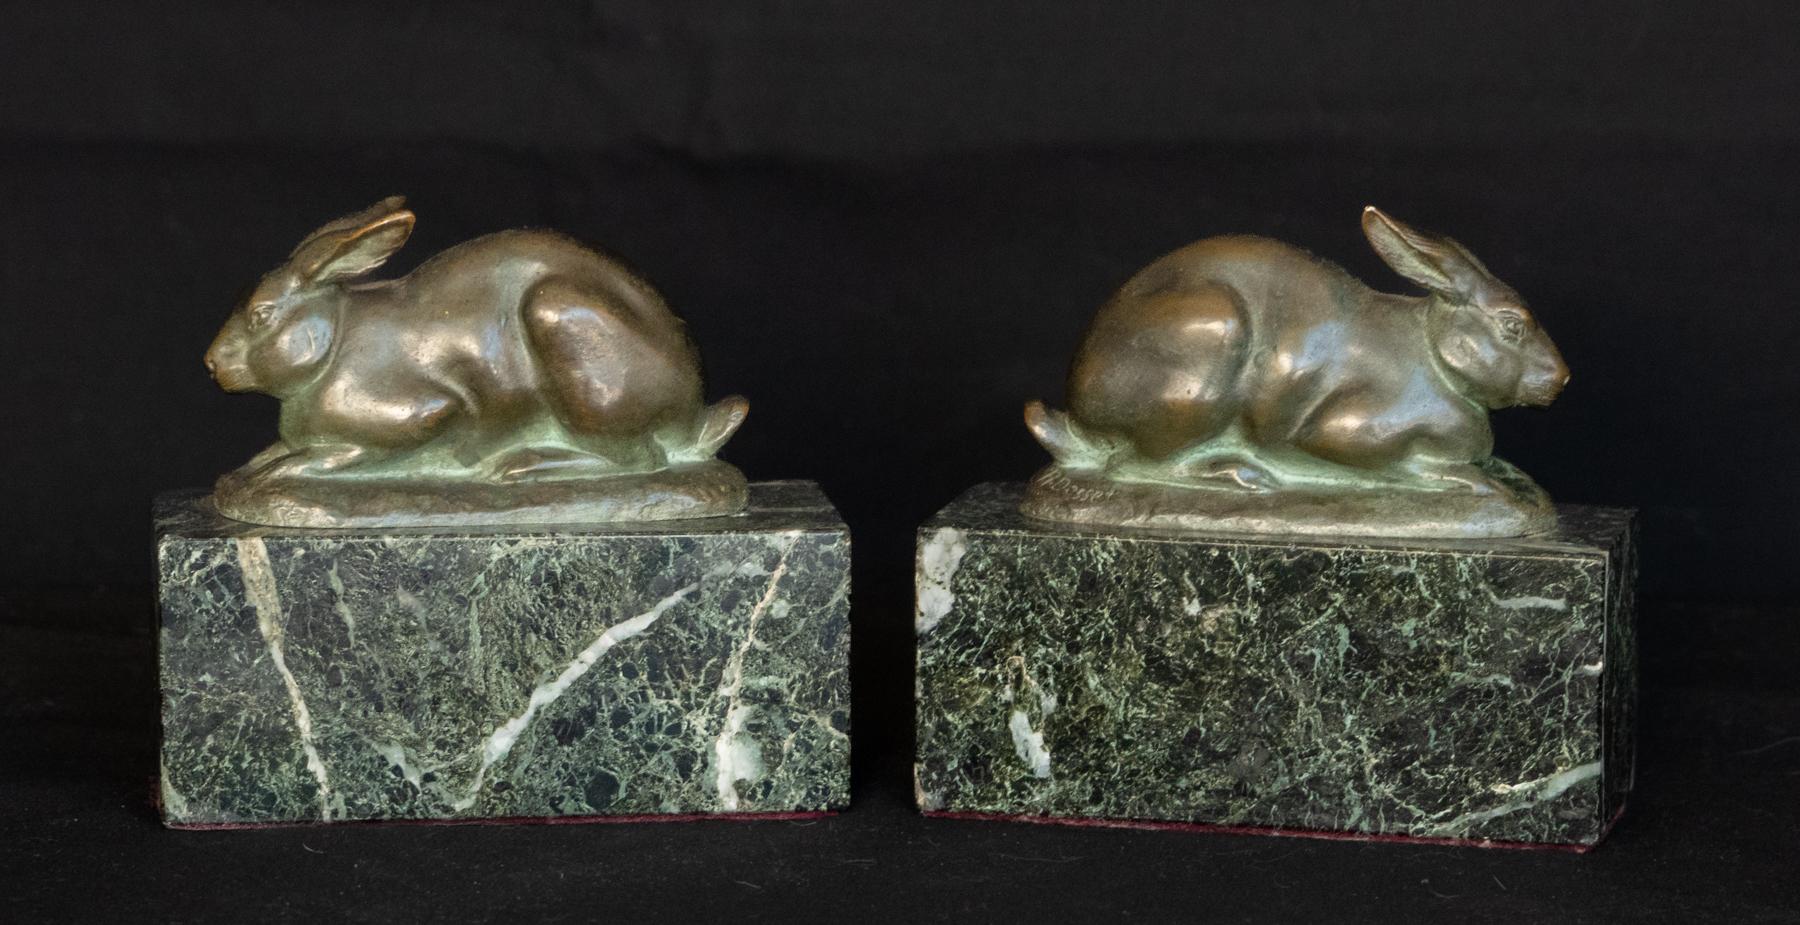 Pair of Art Deco Austrian Bronze Rabbits Signed R. Desset
Each rabbit mounted on a block of variegated green serpentine marble.
Rabbits are each modeled in a different pose. The natural green verdigris bronze complimenting the serpentine bases.